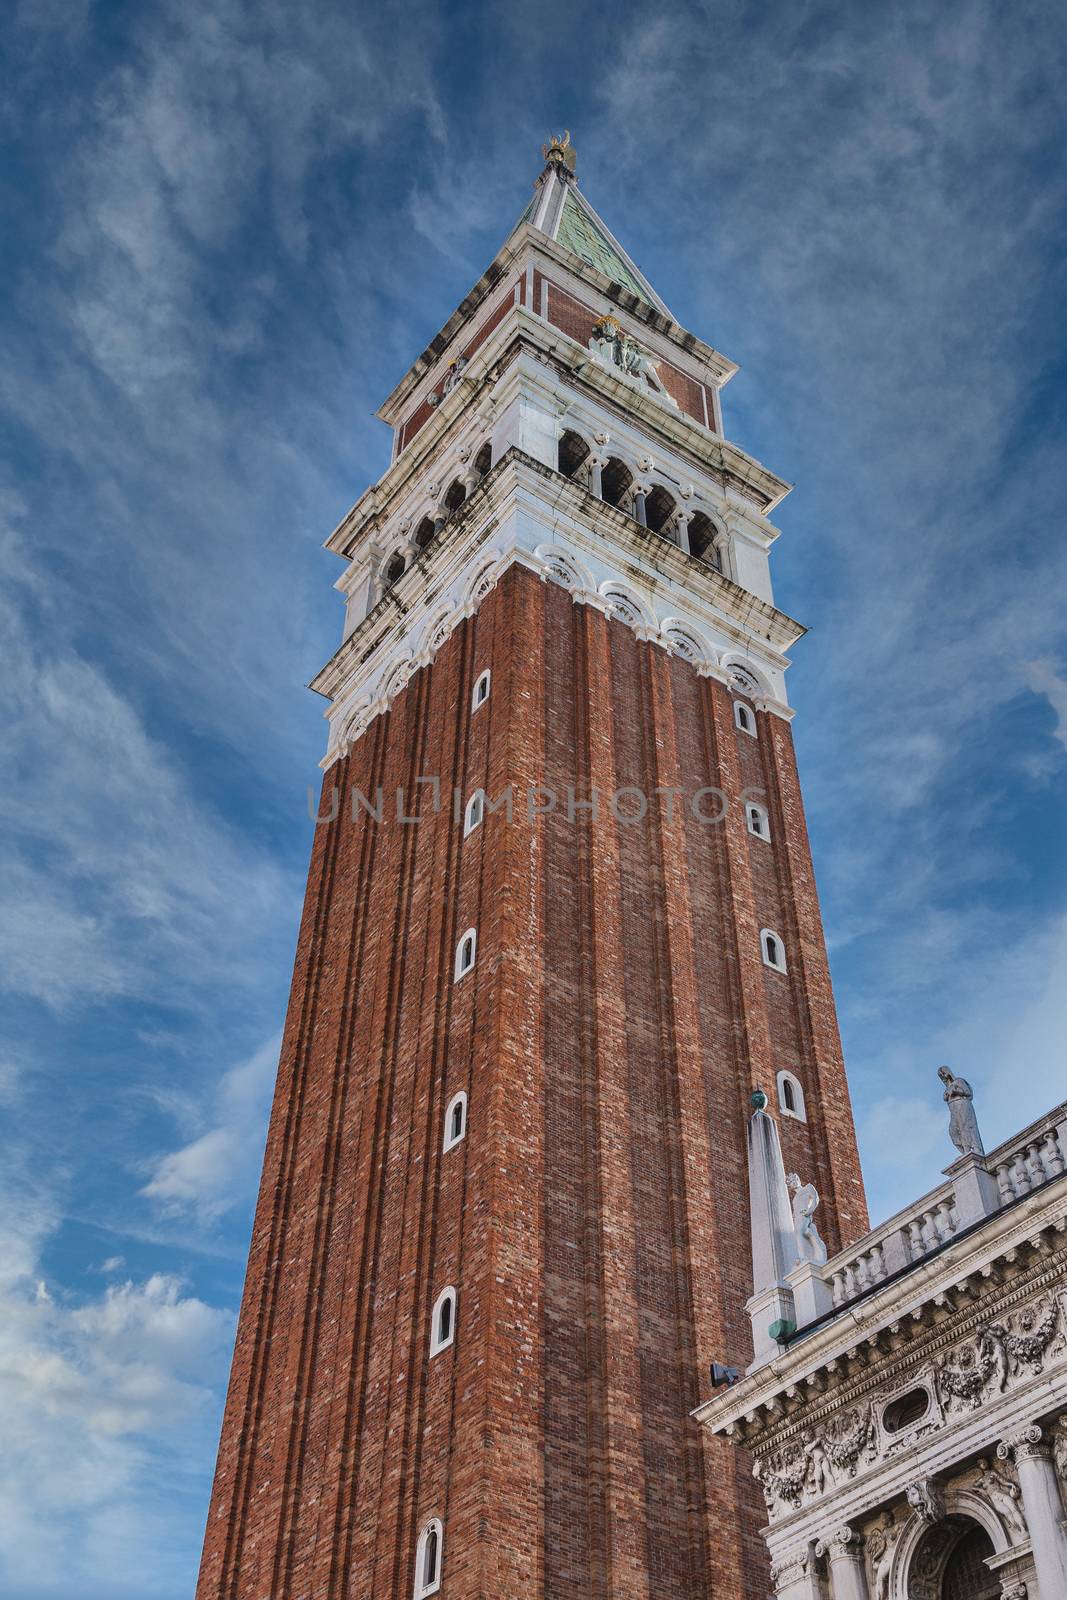 View of the Famous Bell Tower in Saint Mark's Square from Below